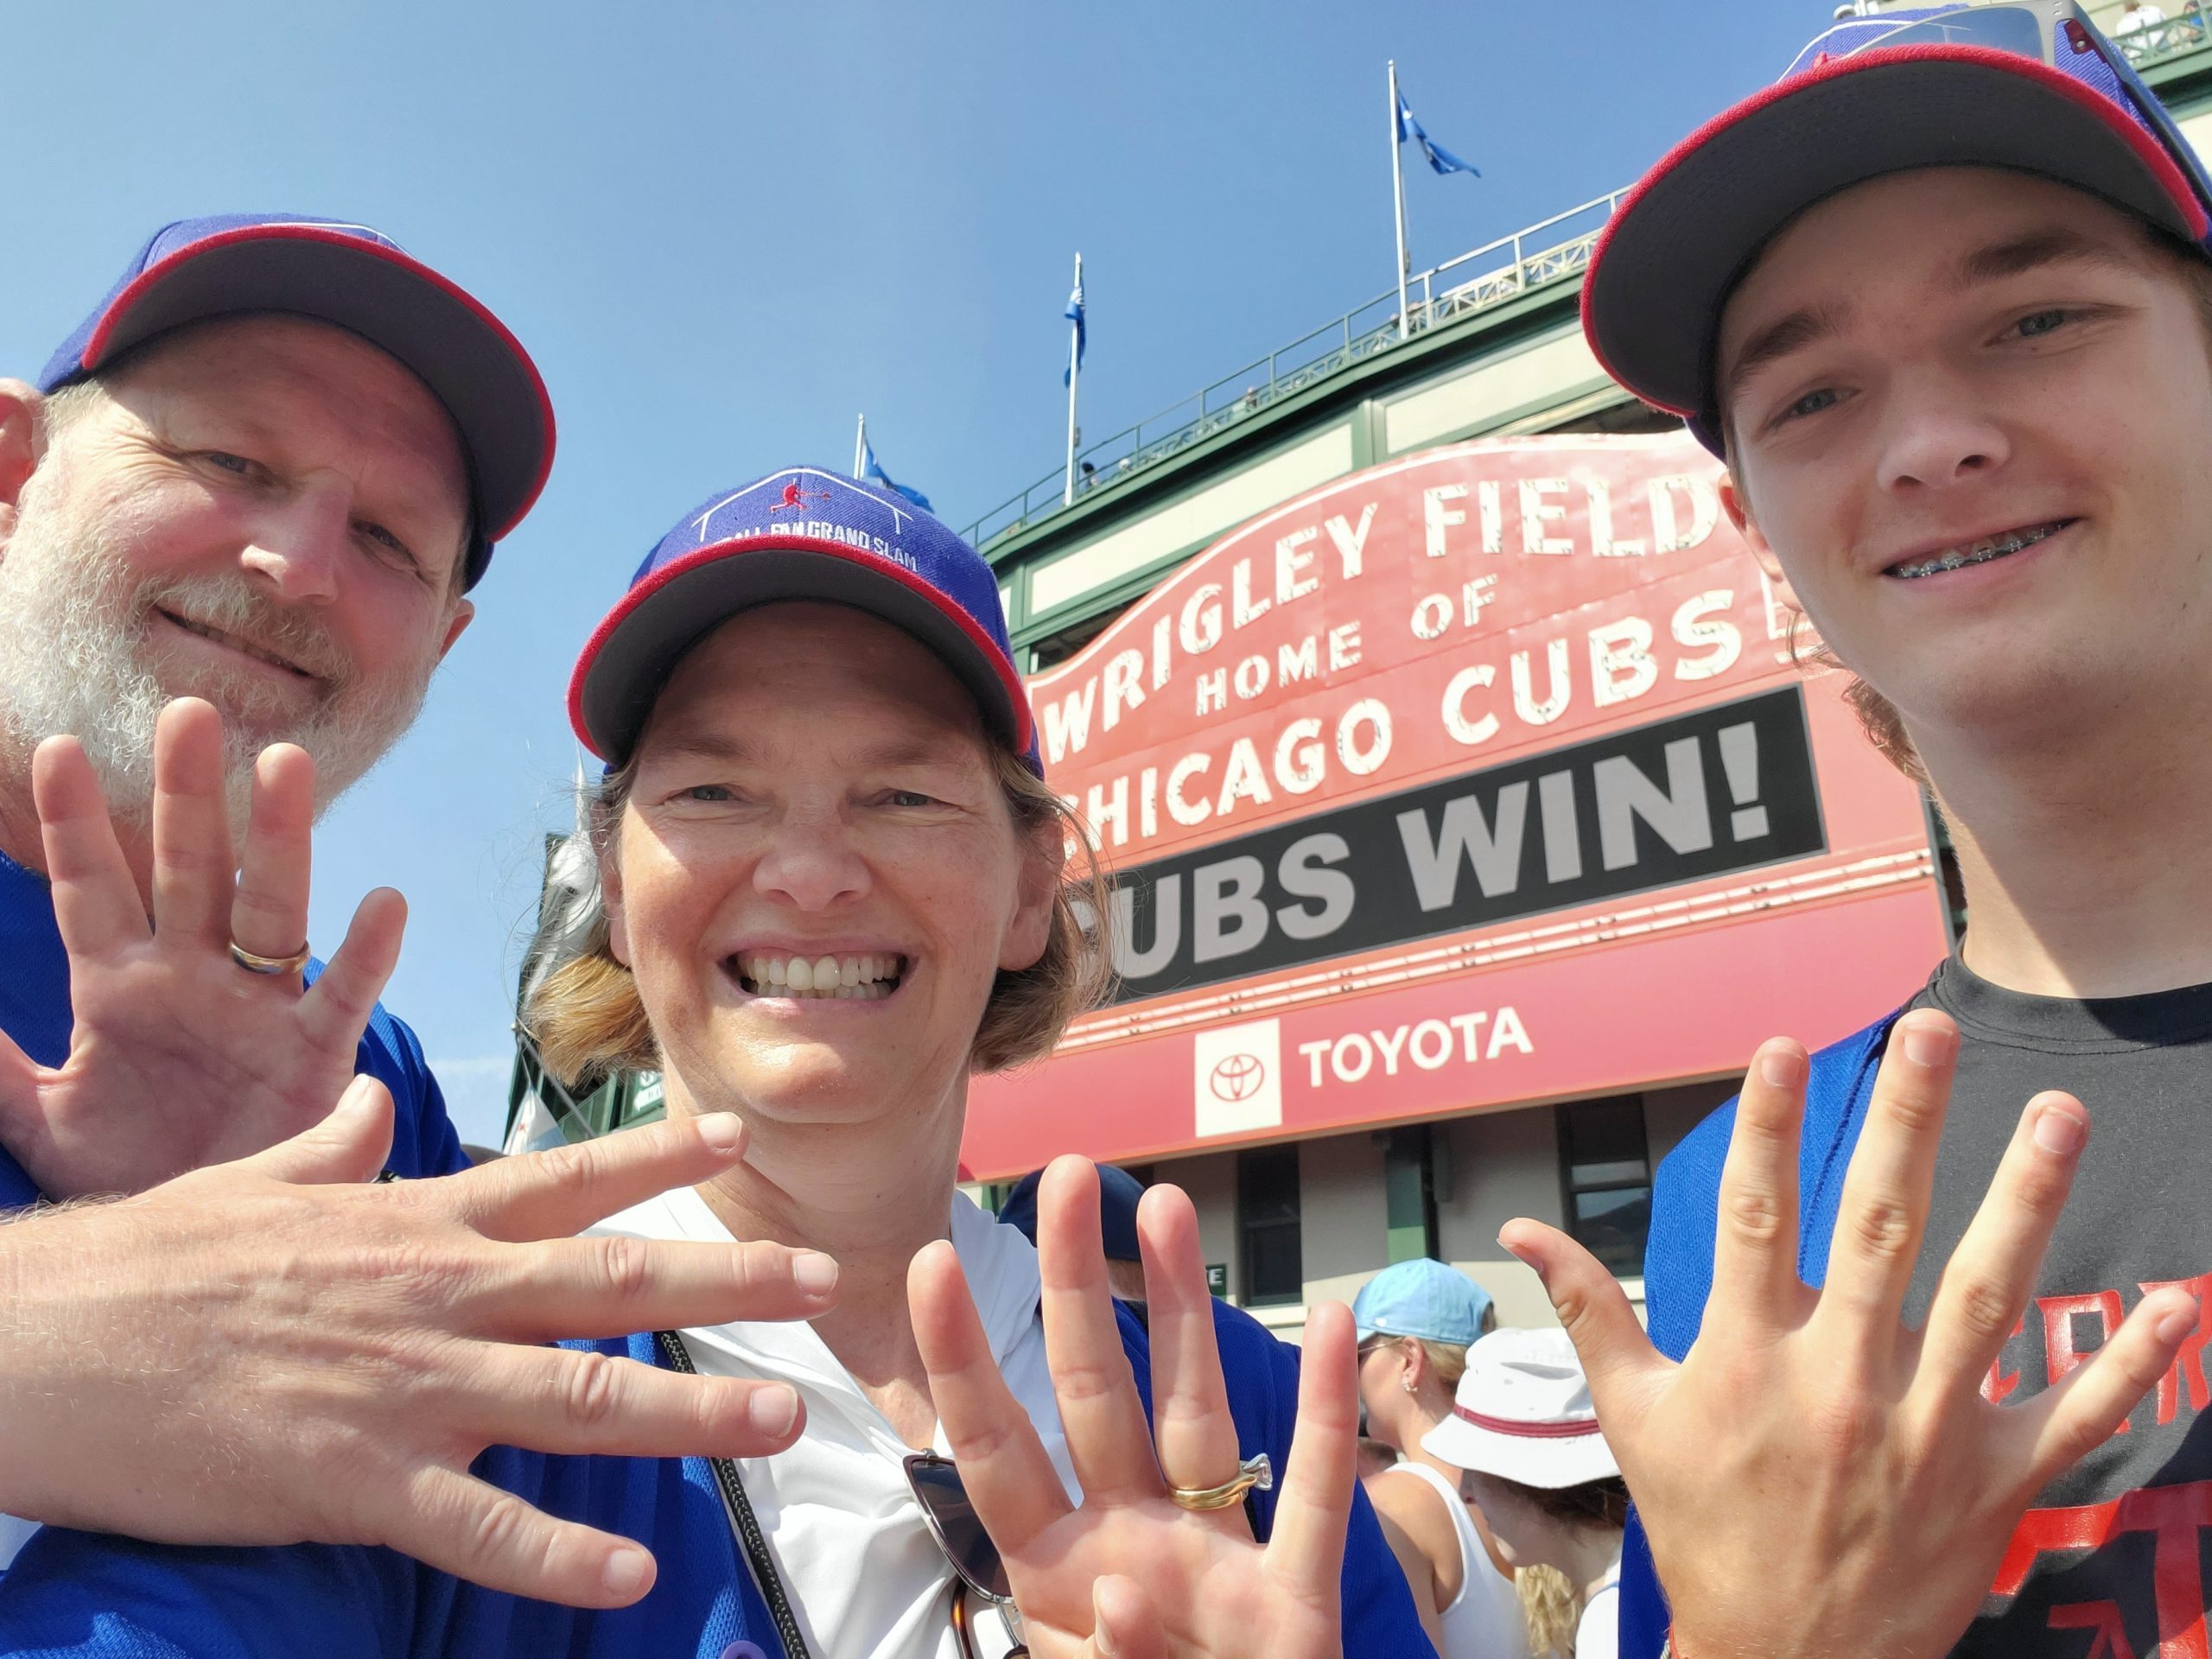 Heather, Brad and Ryan with 19 fingers up, representing the 19th stadium: Wrigley Field.